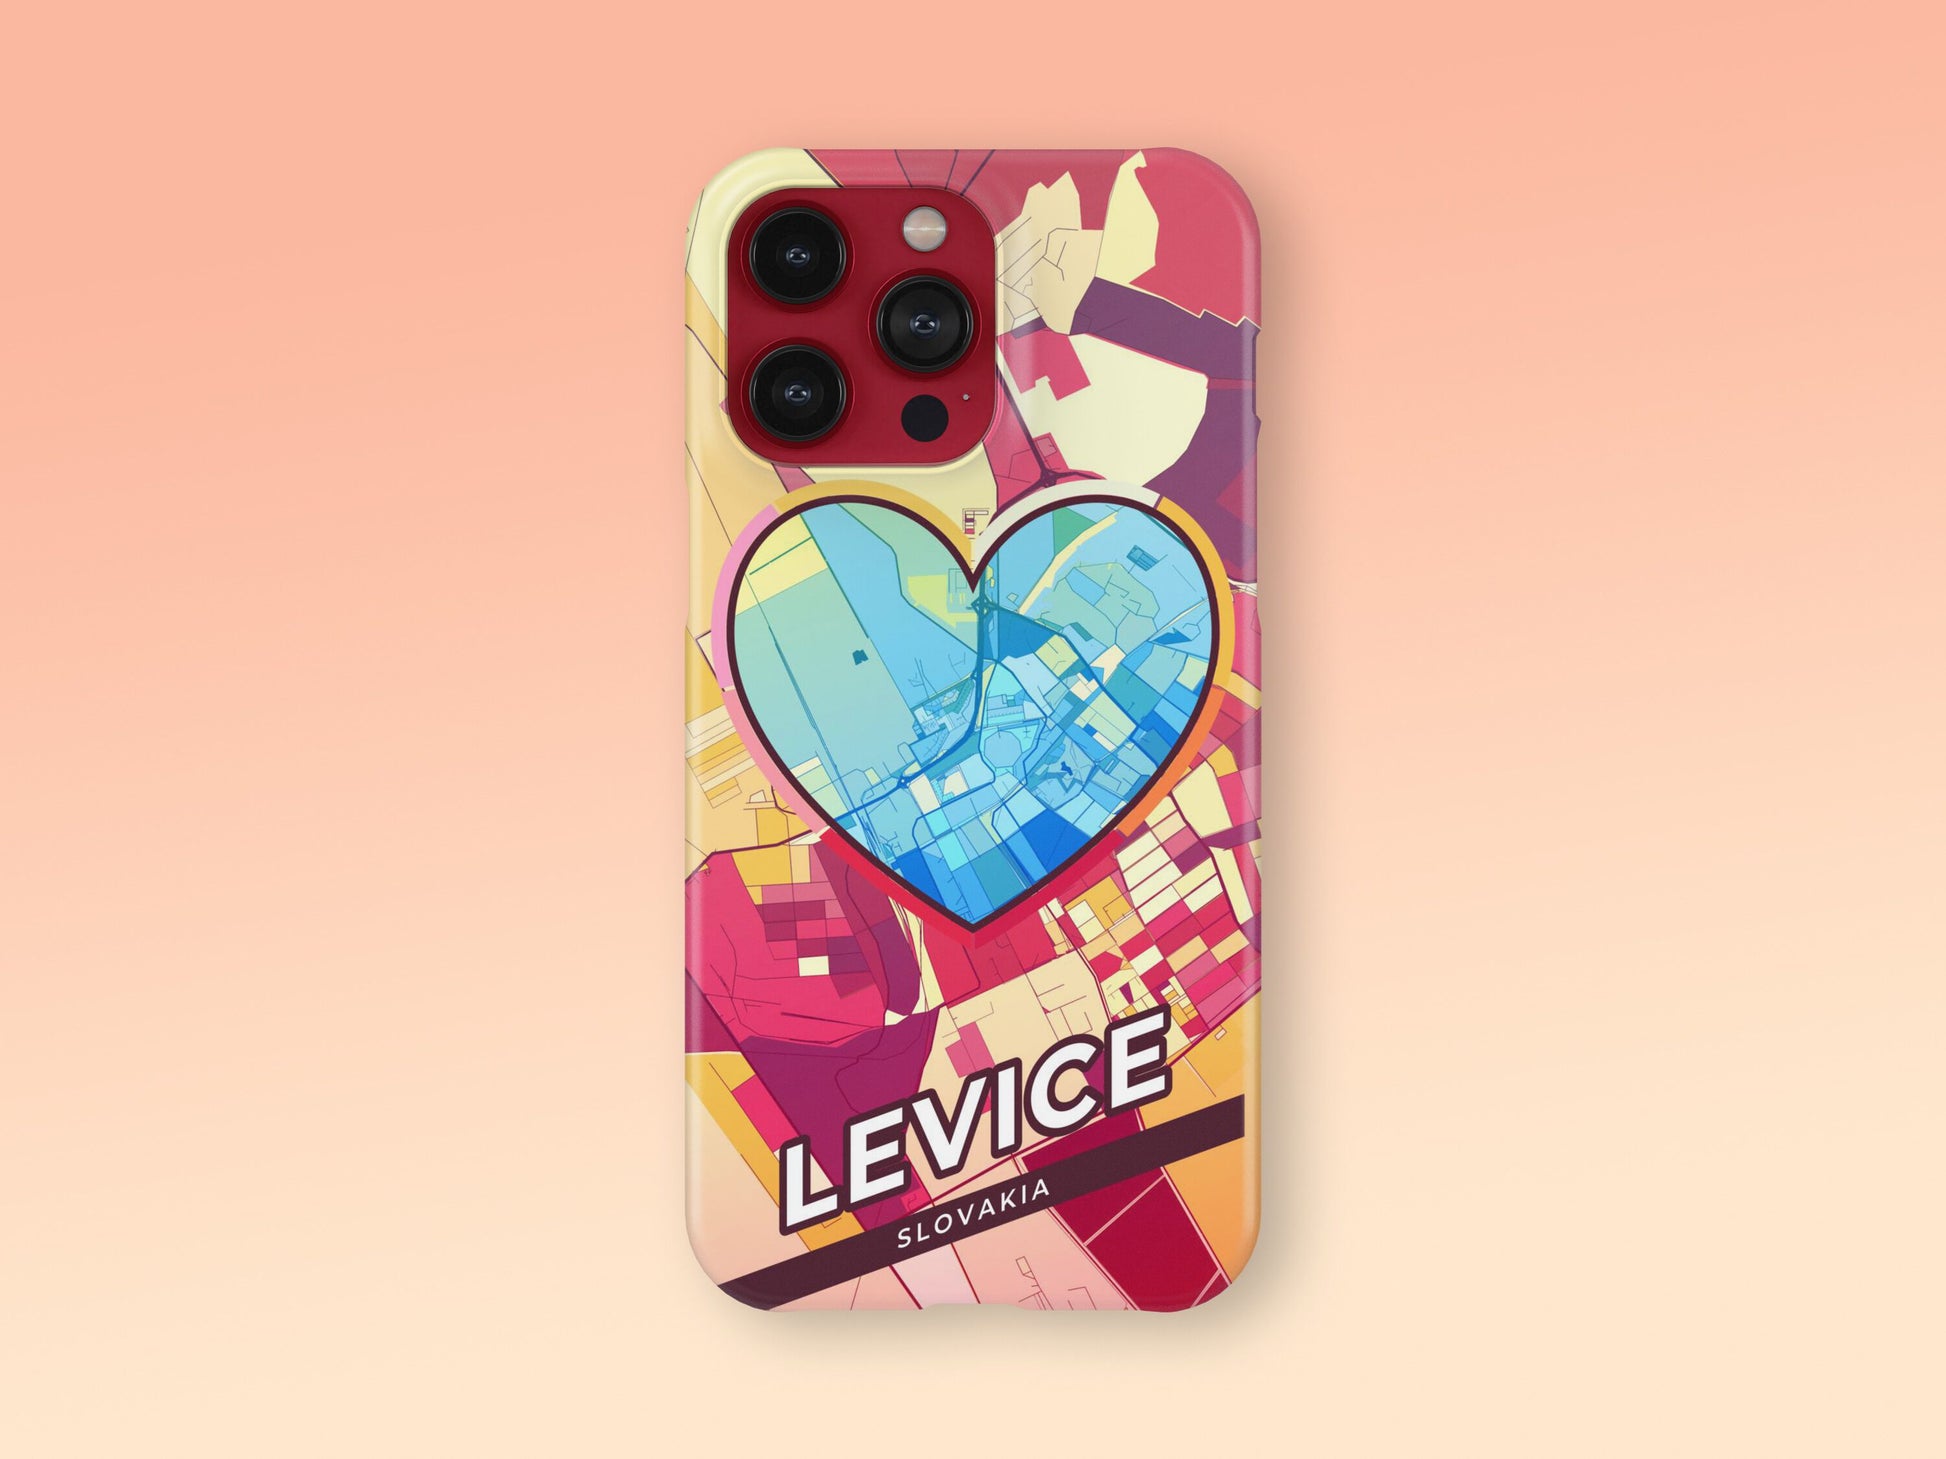 Levice Slovakia slim phone case with colorful icon. Birthday, wedding or housewarming gift. Couple match cases. 2